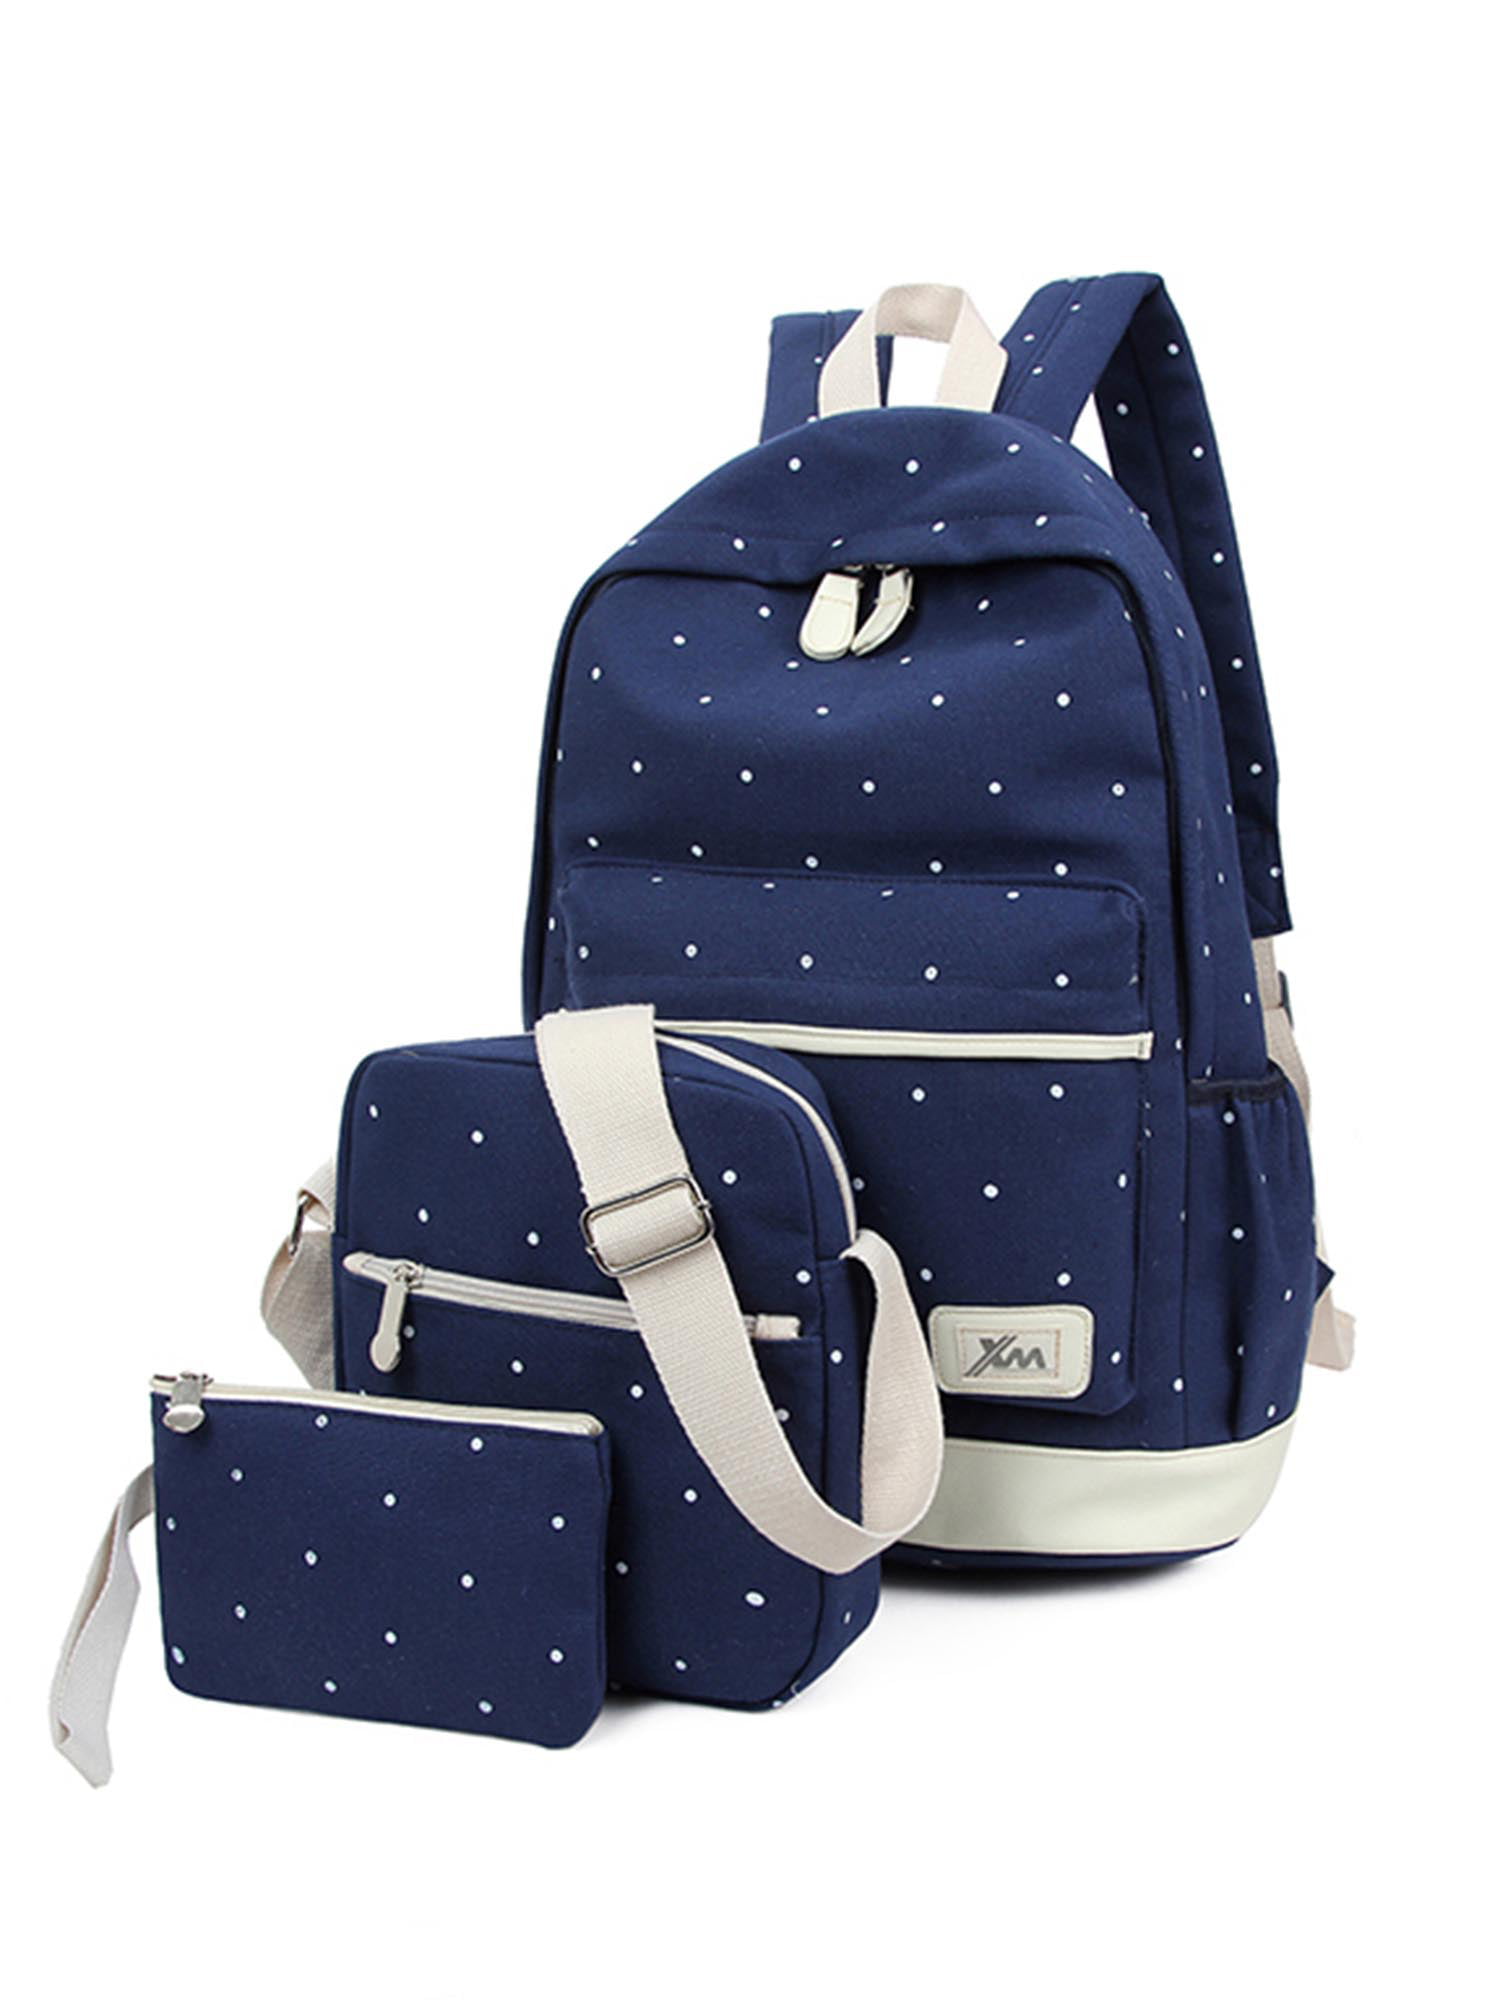 Lowestbest - Lowestbest 3Pcs/Sets School Canvas Backpacks for Teenage